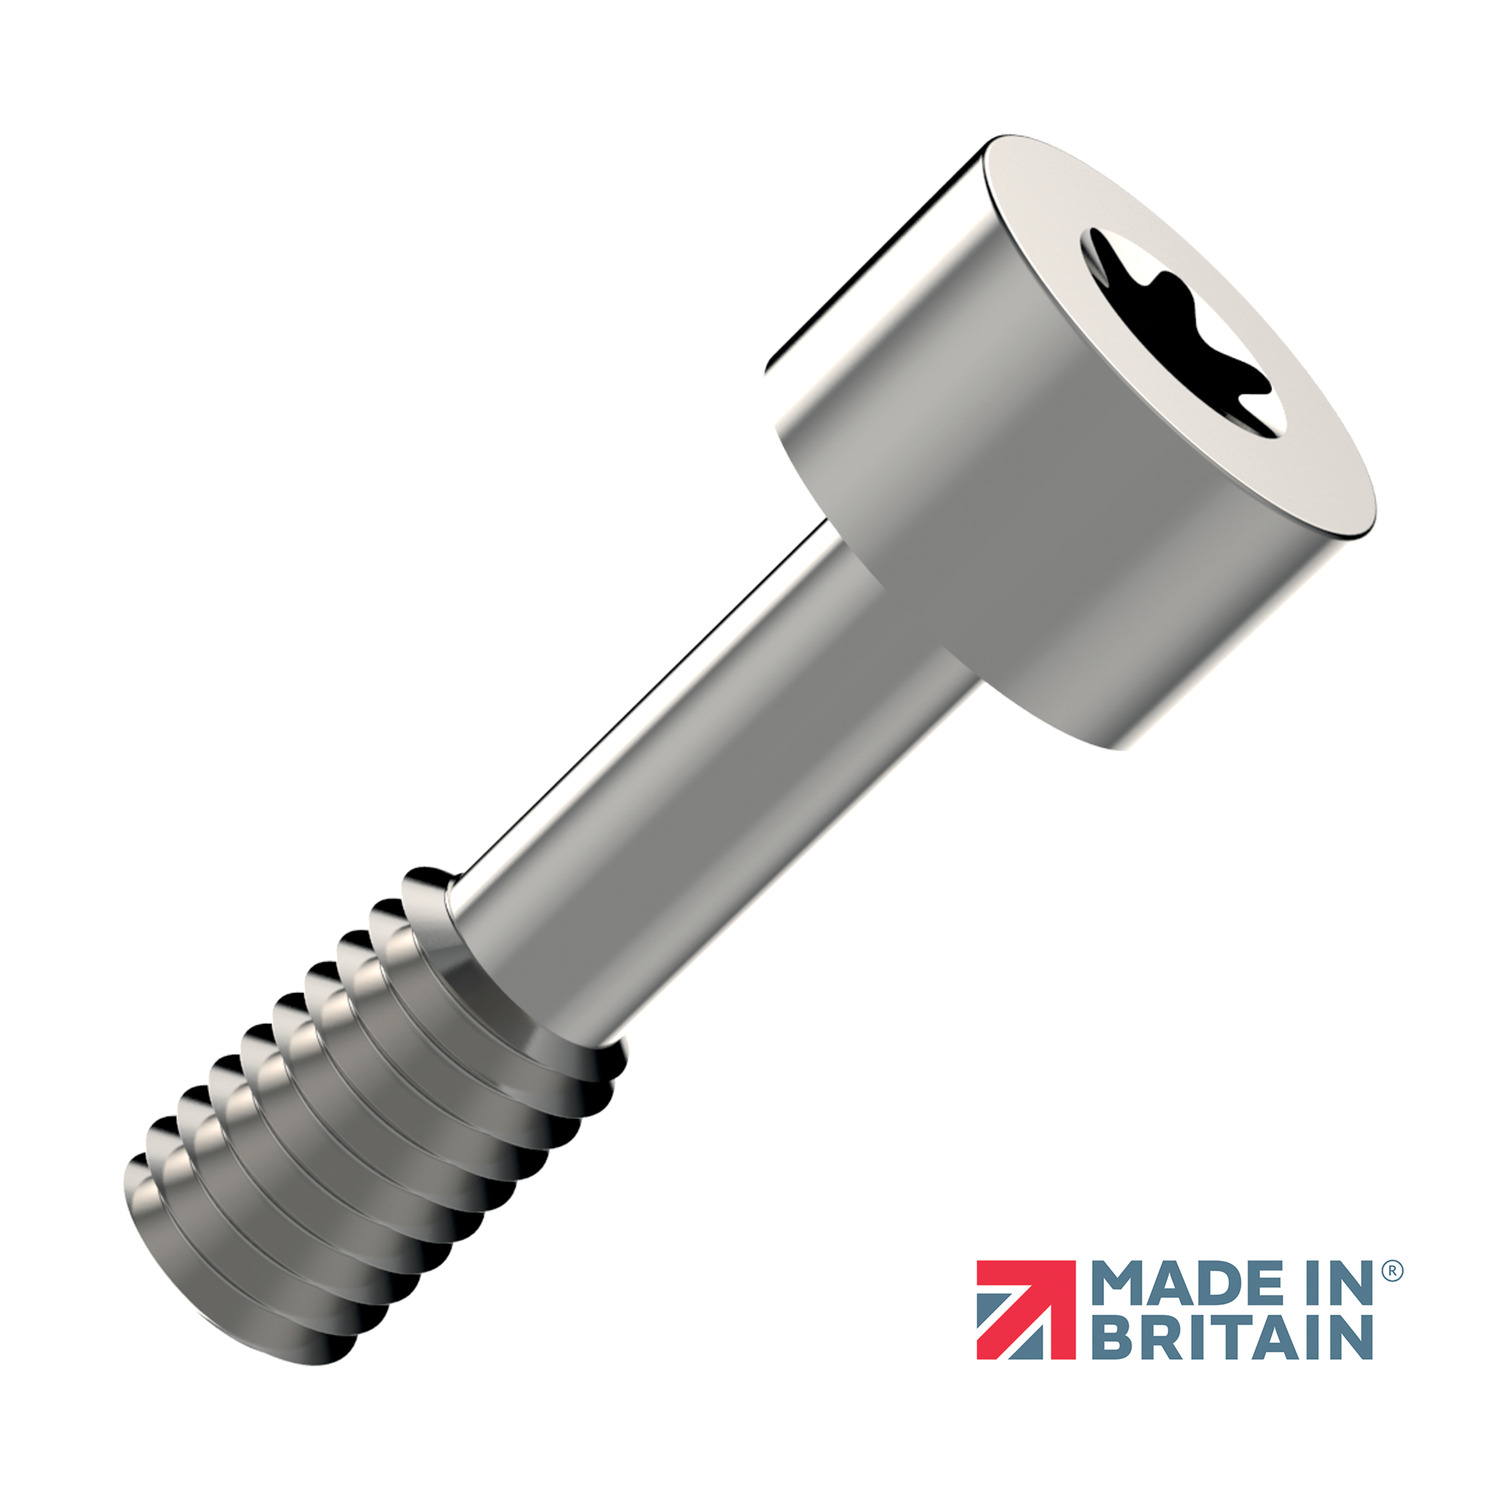 Captive Screws - Cap Head Torx cap head captive screws available in AISI 303 and AISI 316 stainless steel, blackened stainless steel and Titanium.